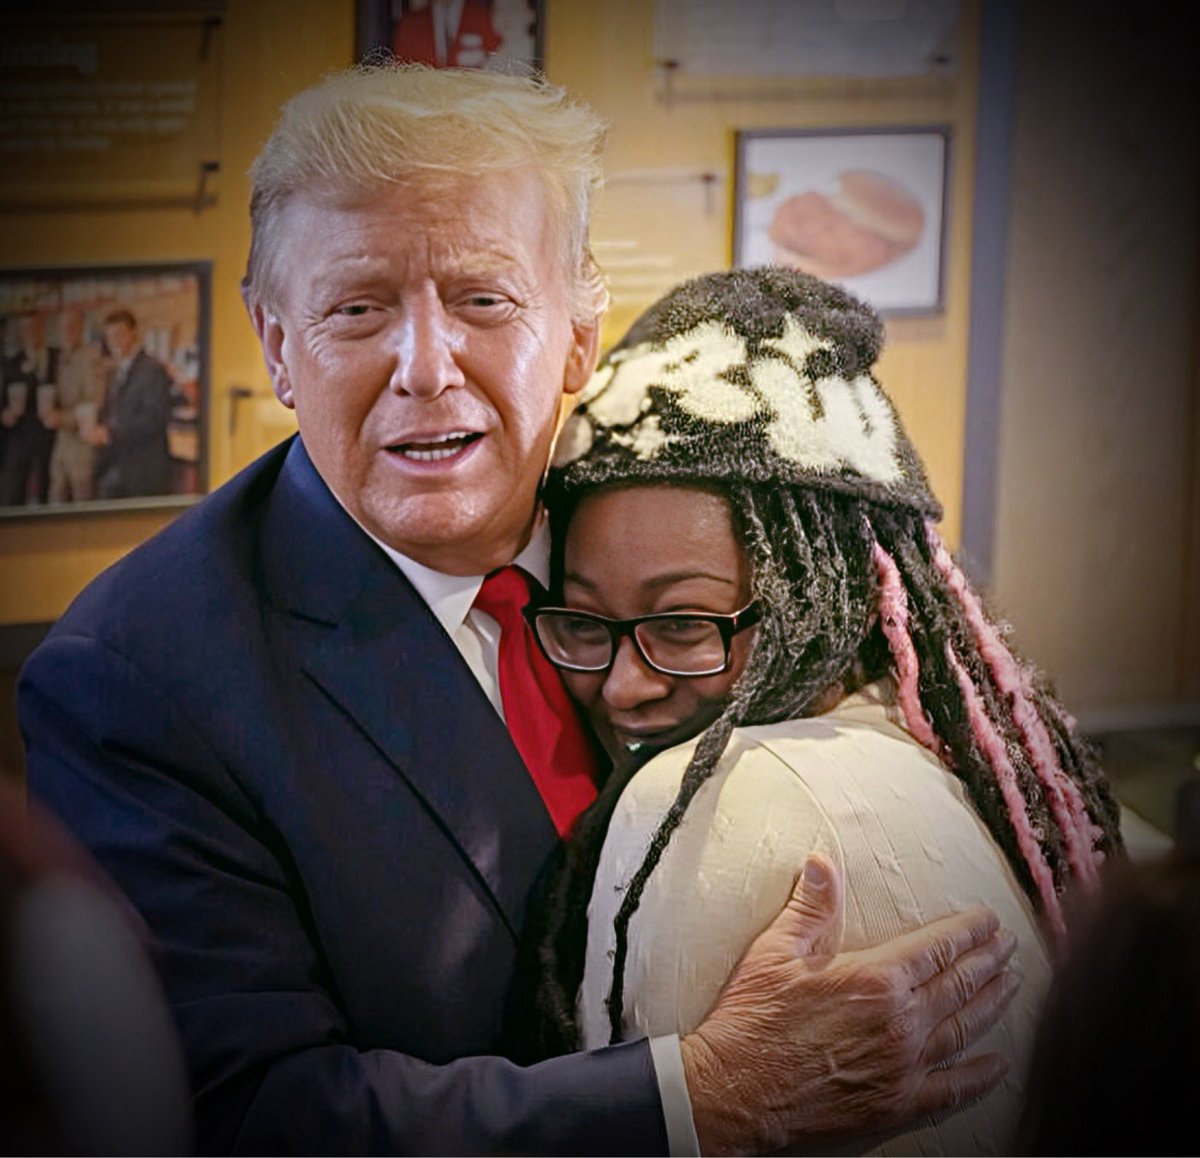 This photo should be showcased on every news station, should be gracing front pages of newspapers & covers of magazines all across America. But it won’t, because it shows that Donald Trump is loved.